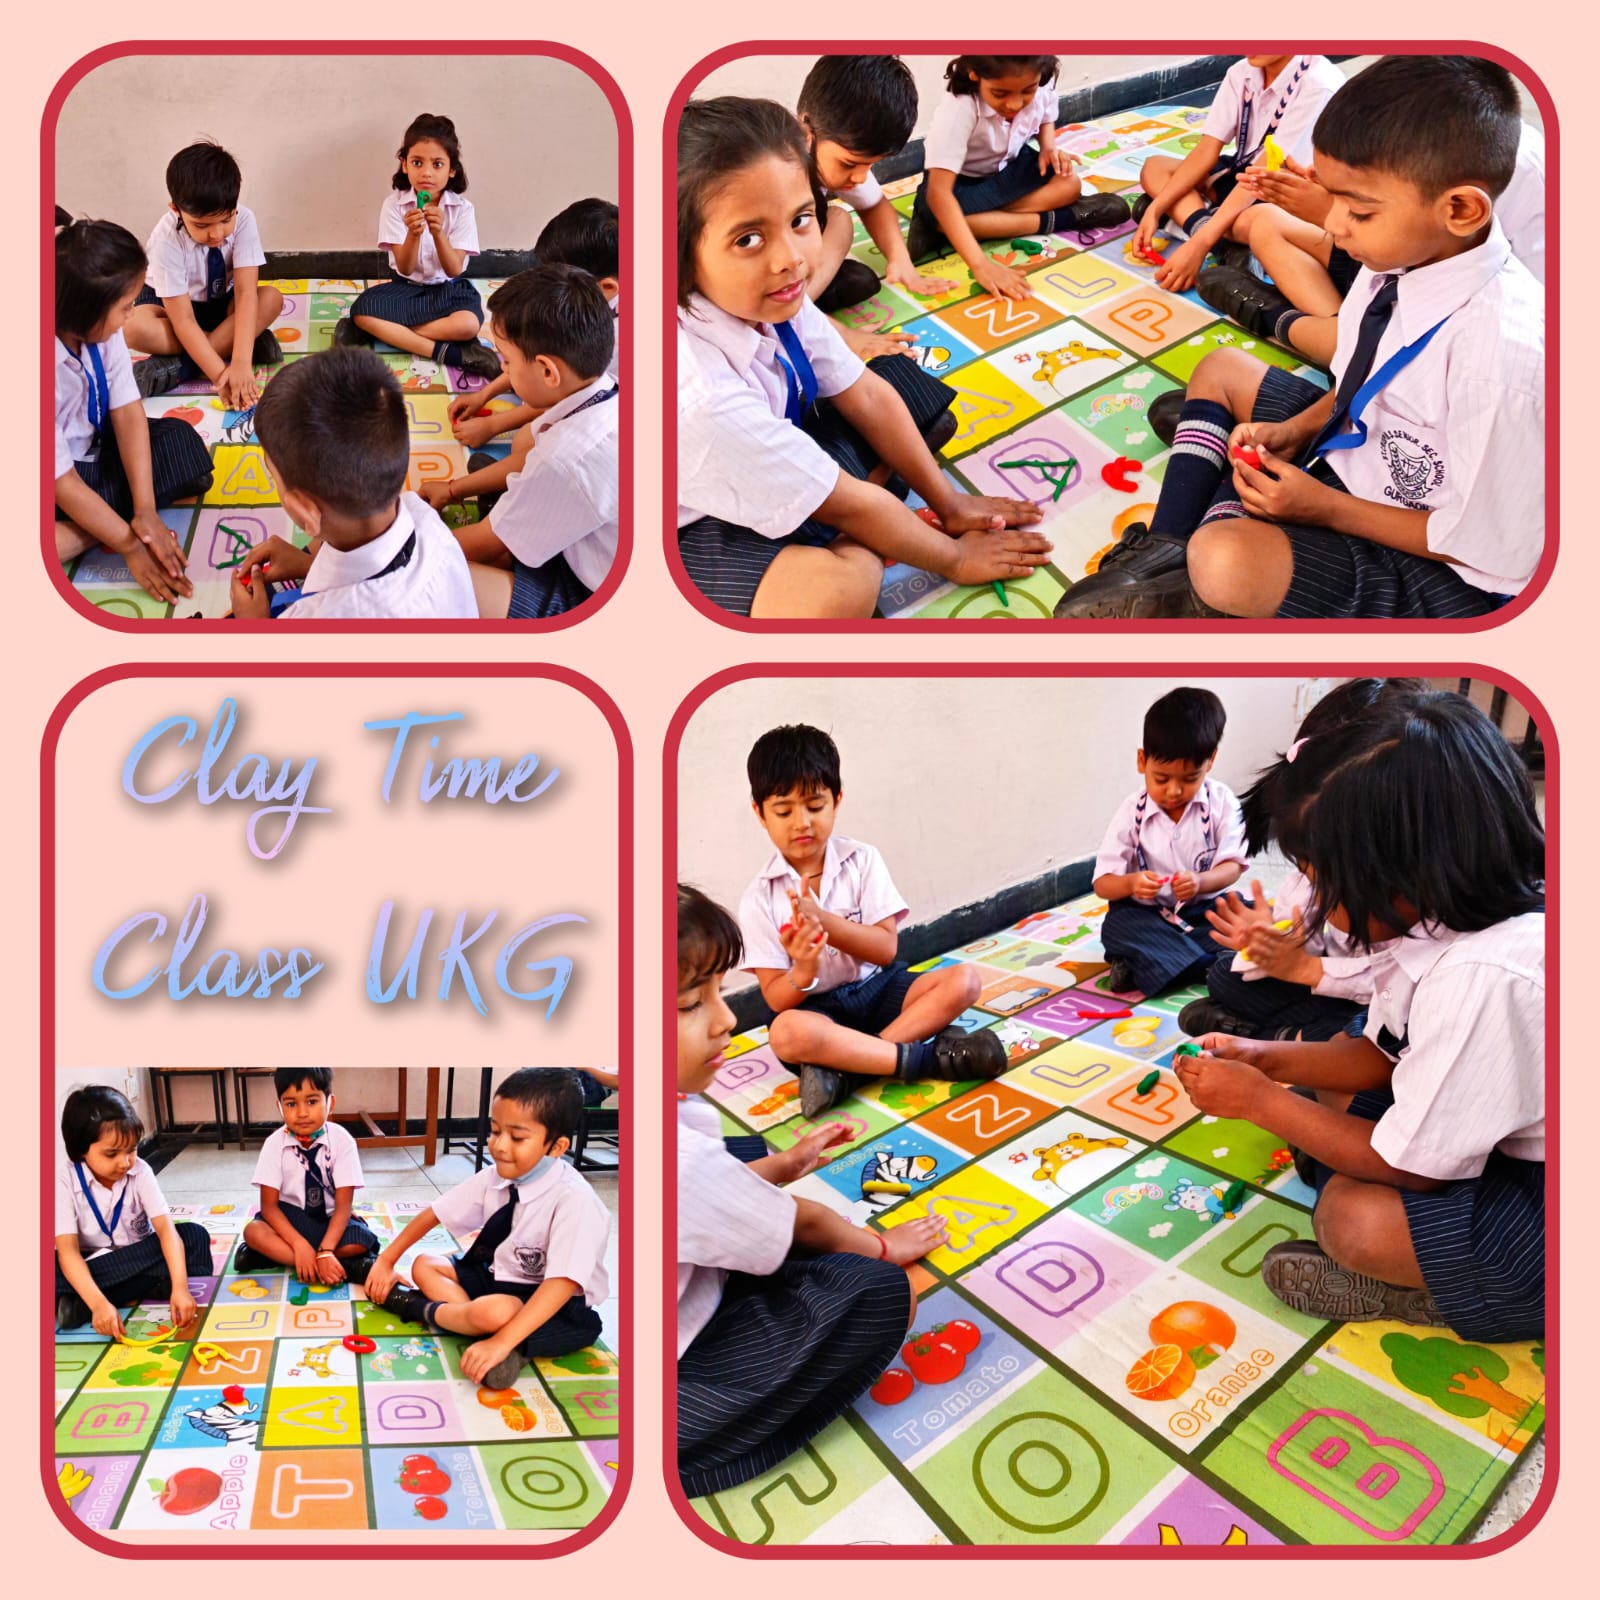  GAME WITH CLAY ACTIVITY